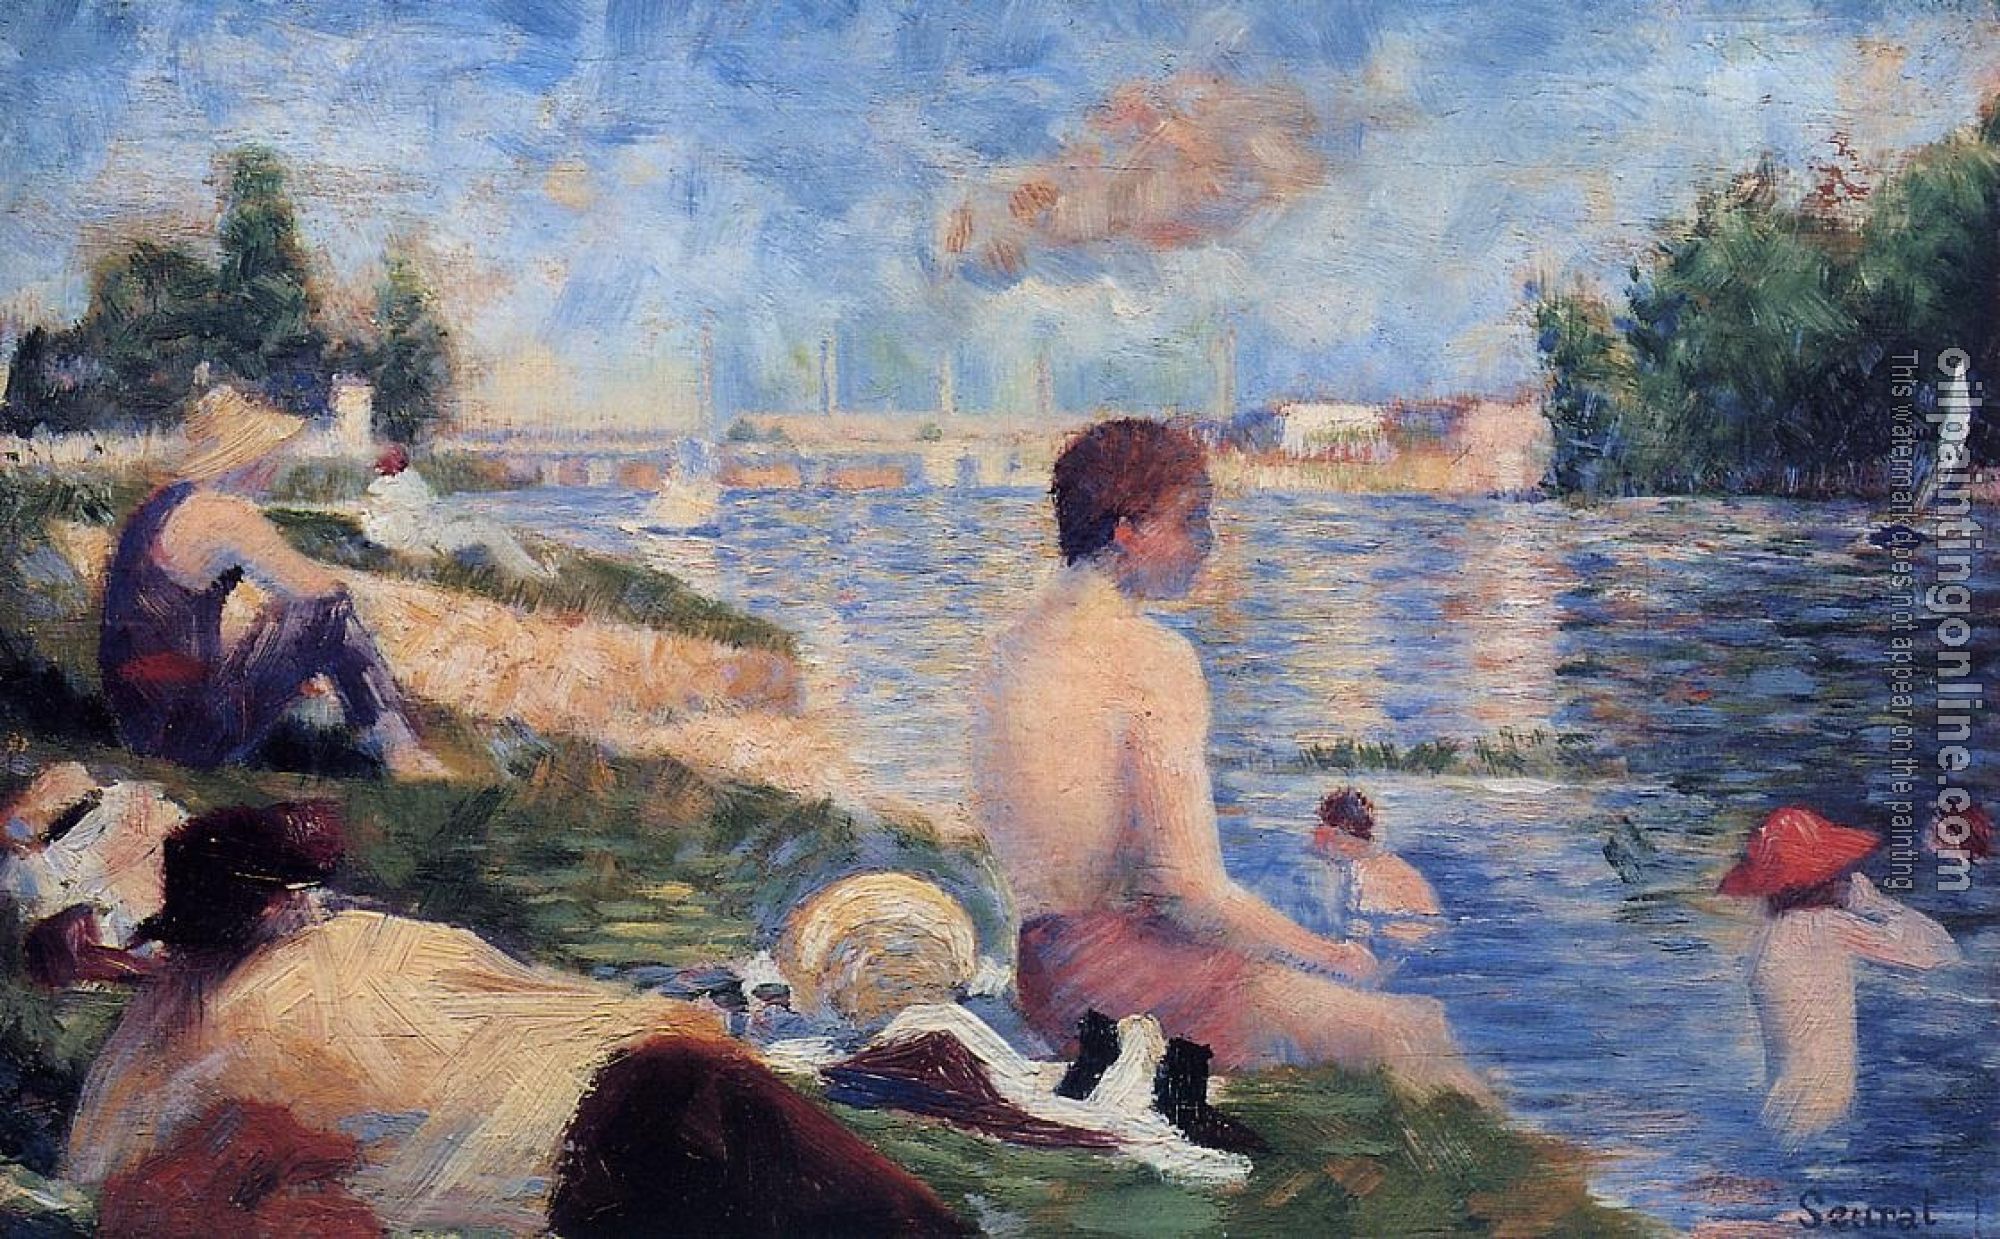 Seurat, Georges - Bathing at Asnieres, Final Study